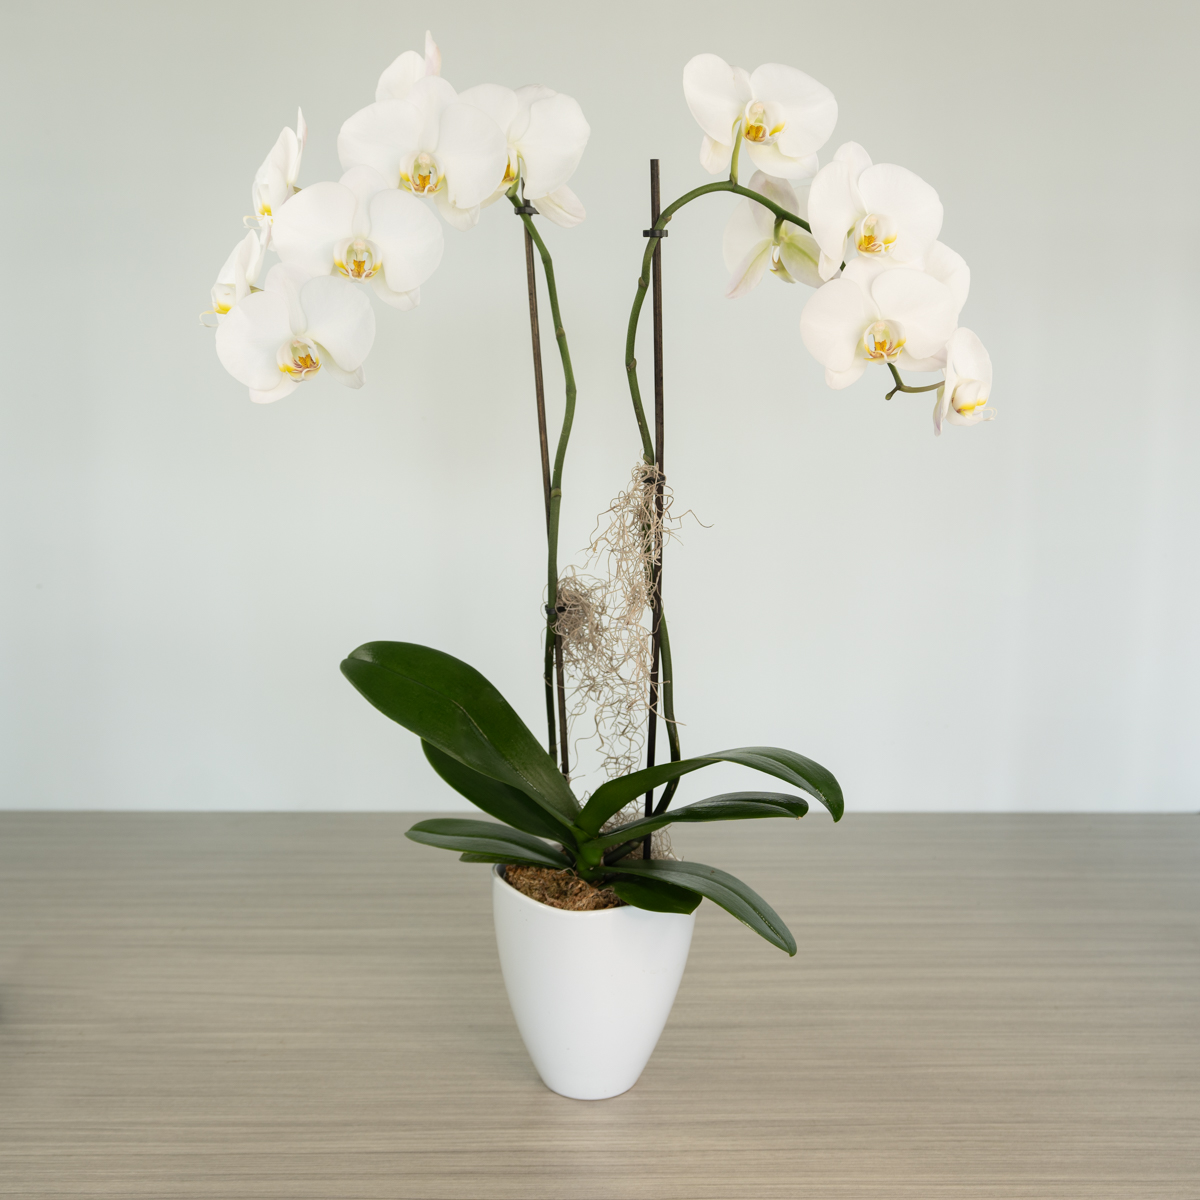 Phalaenopsis orchid plant from Le Bouquet